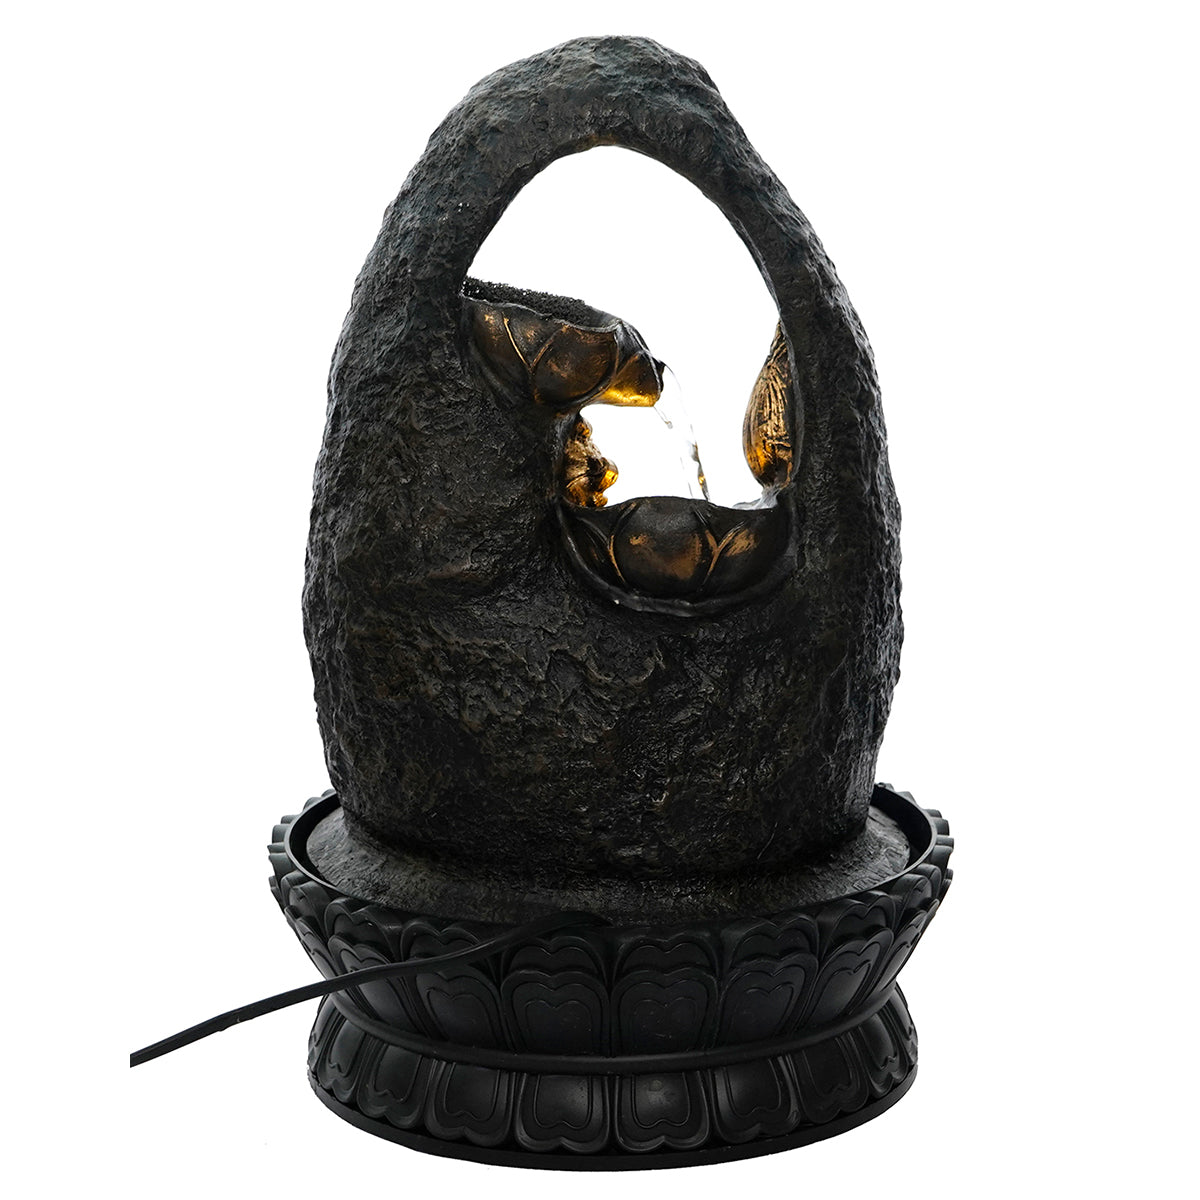 Polystone Black and Golden Decorative Lord Ganesha Idol Water Fountain With Light For Home/Office Décor 4